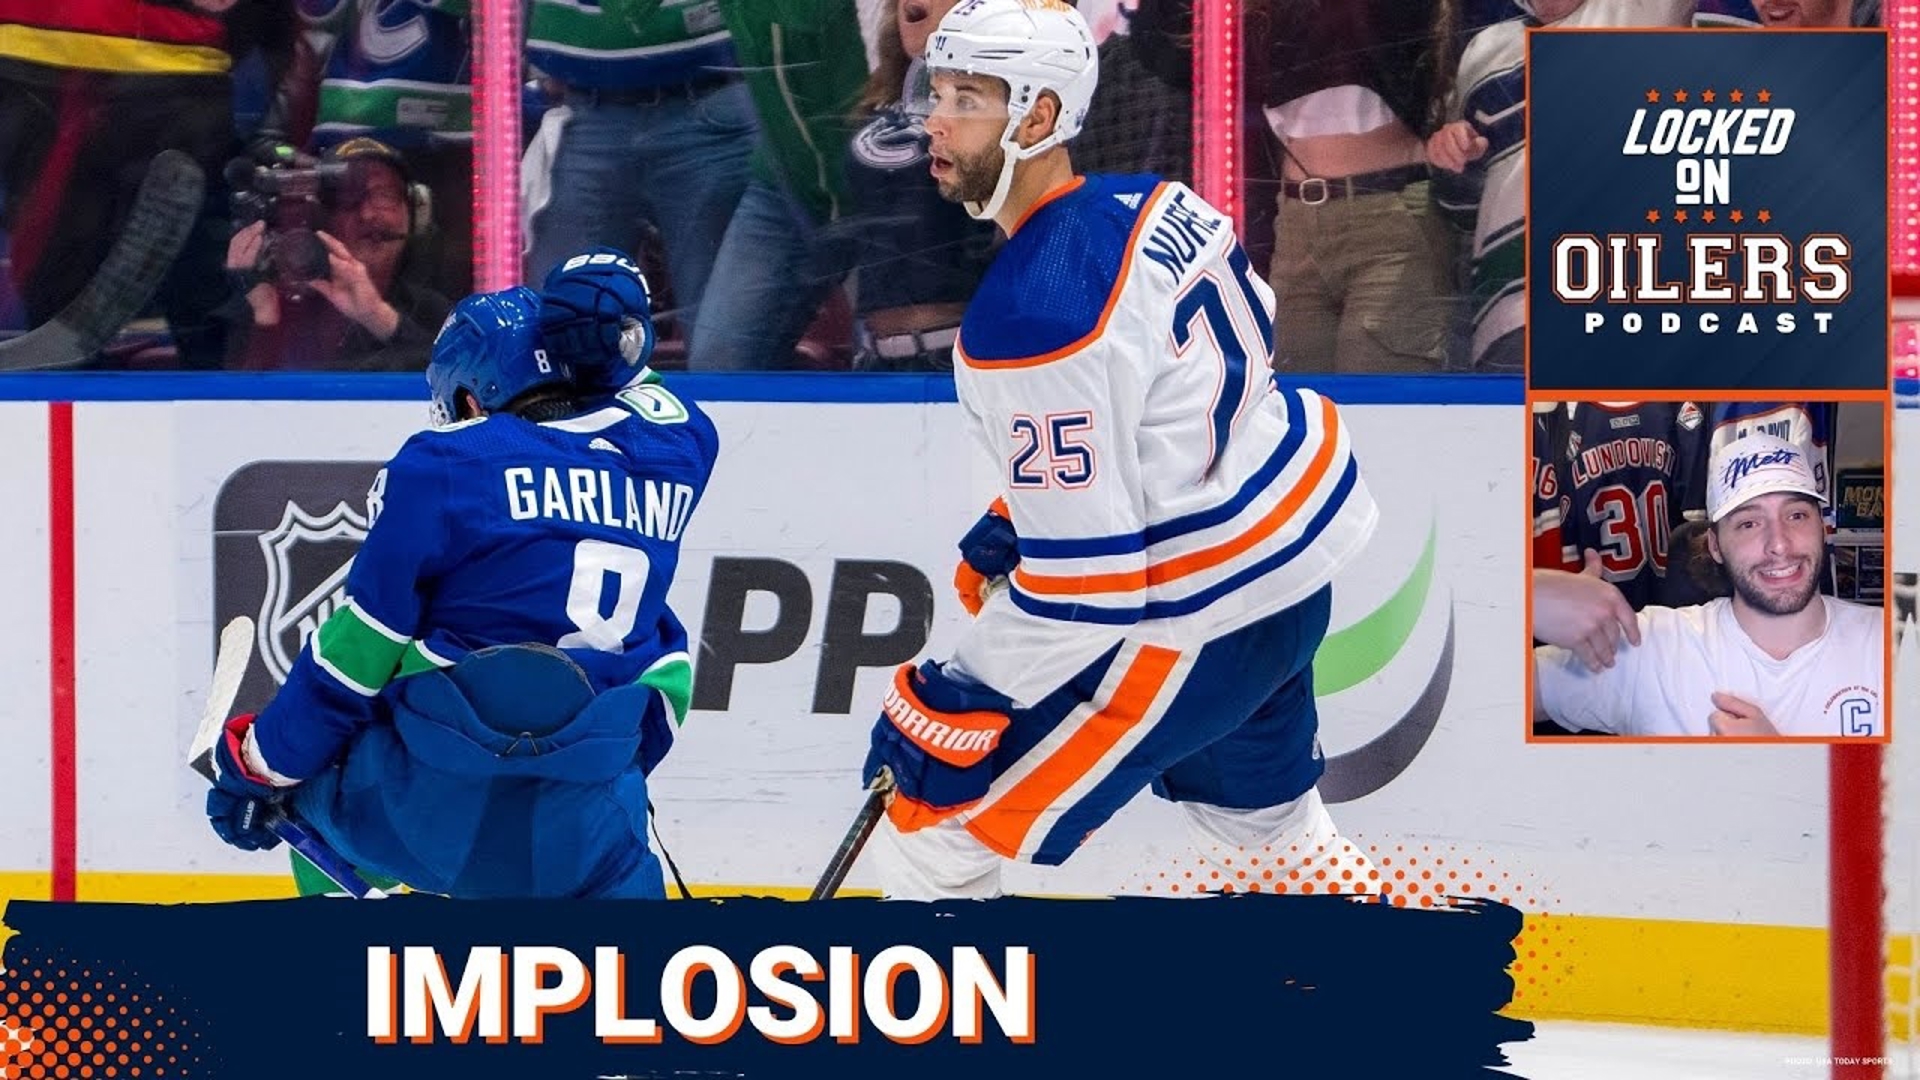 The Edmonton Oilers lost game 1 of their first round series to the Vancouver Canucks 4-3. The Oilers struggled to generate offense after getting out to a big lead.